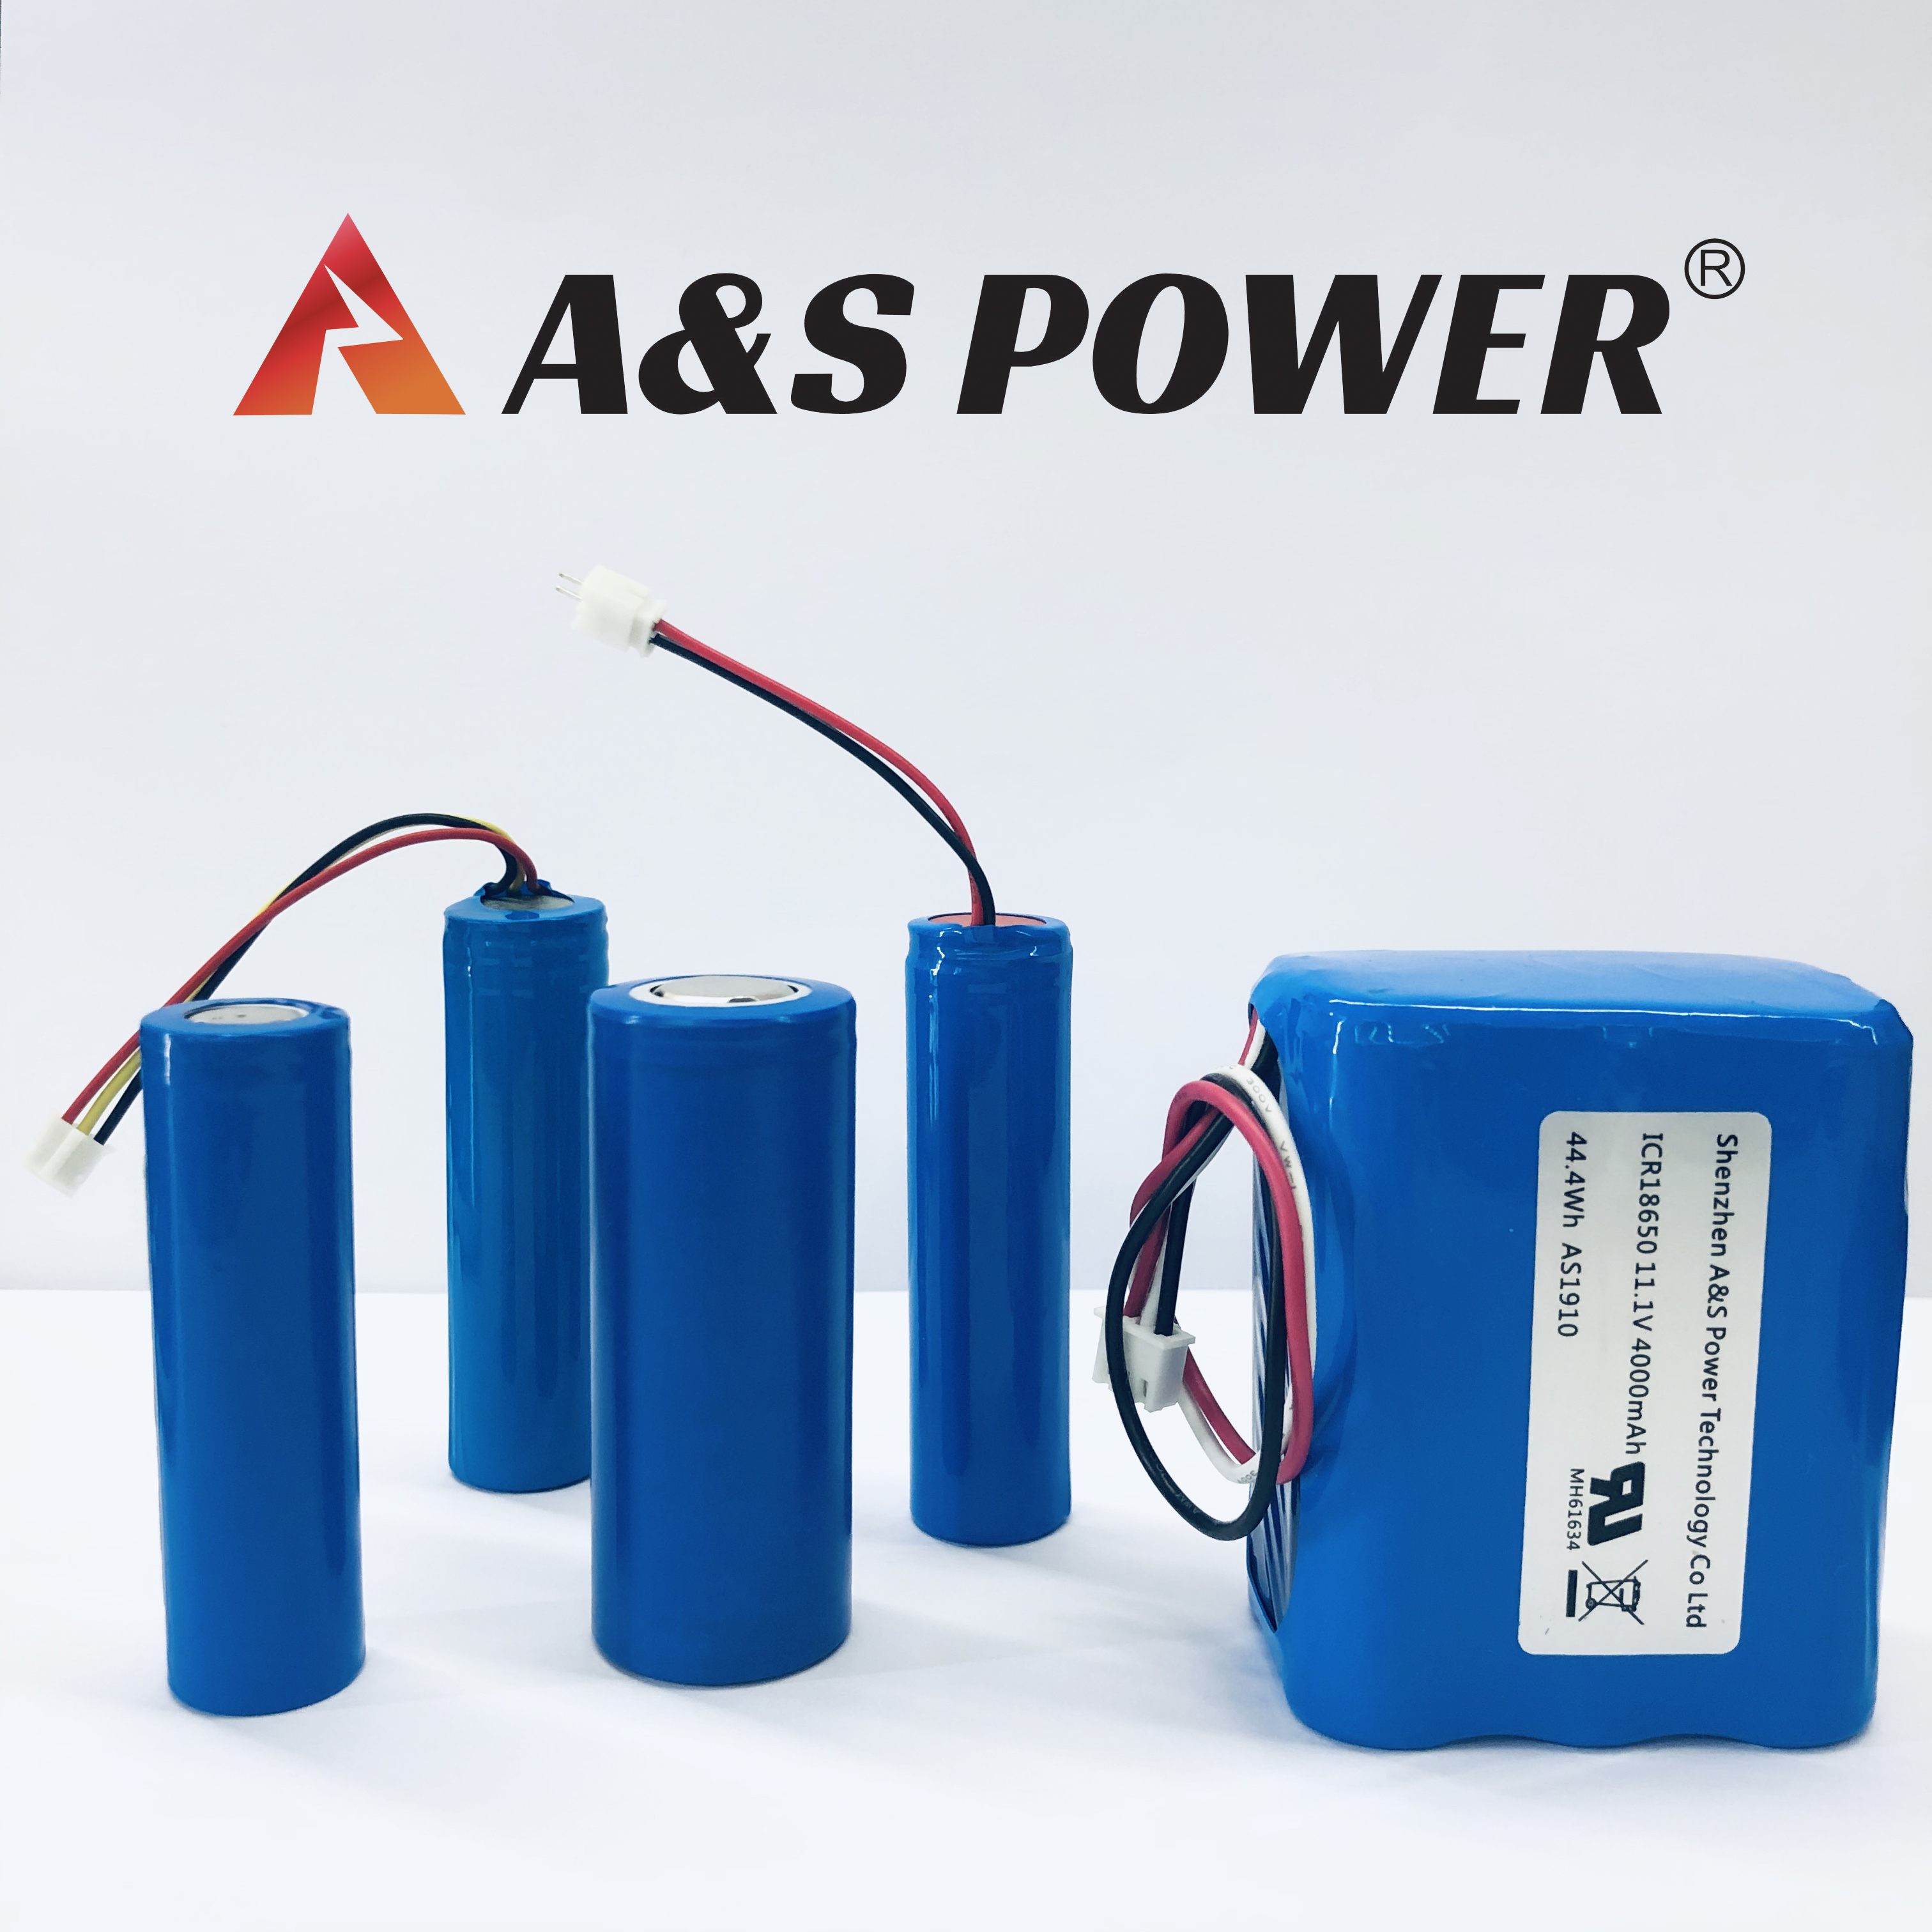 A&S Power Lithium-ion batteries